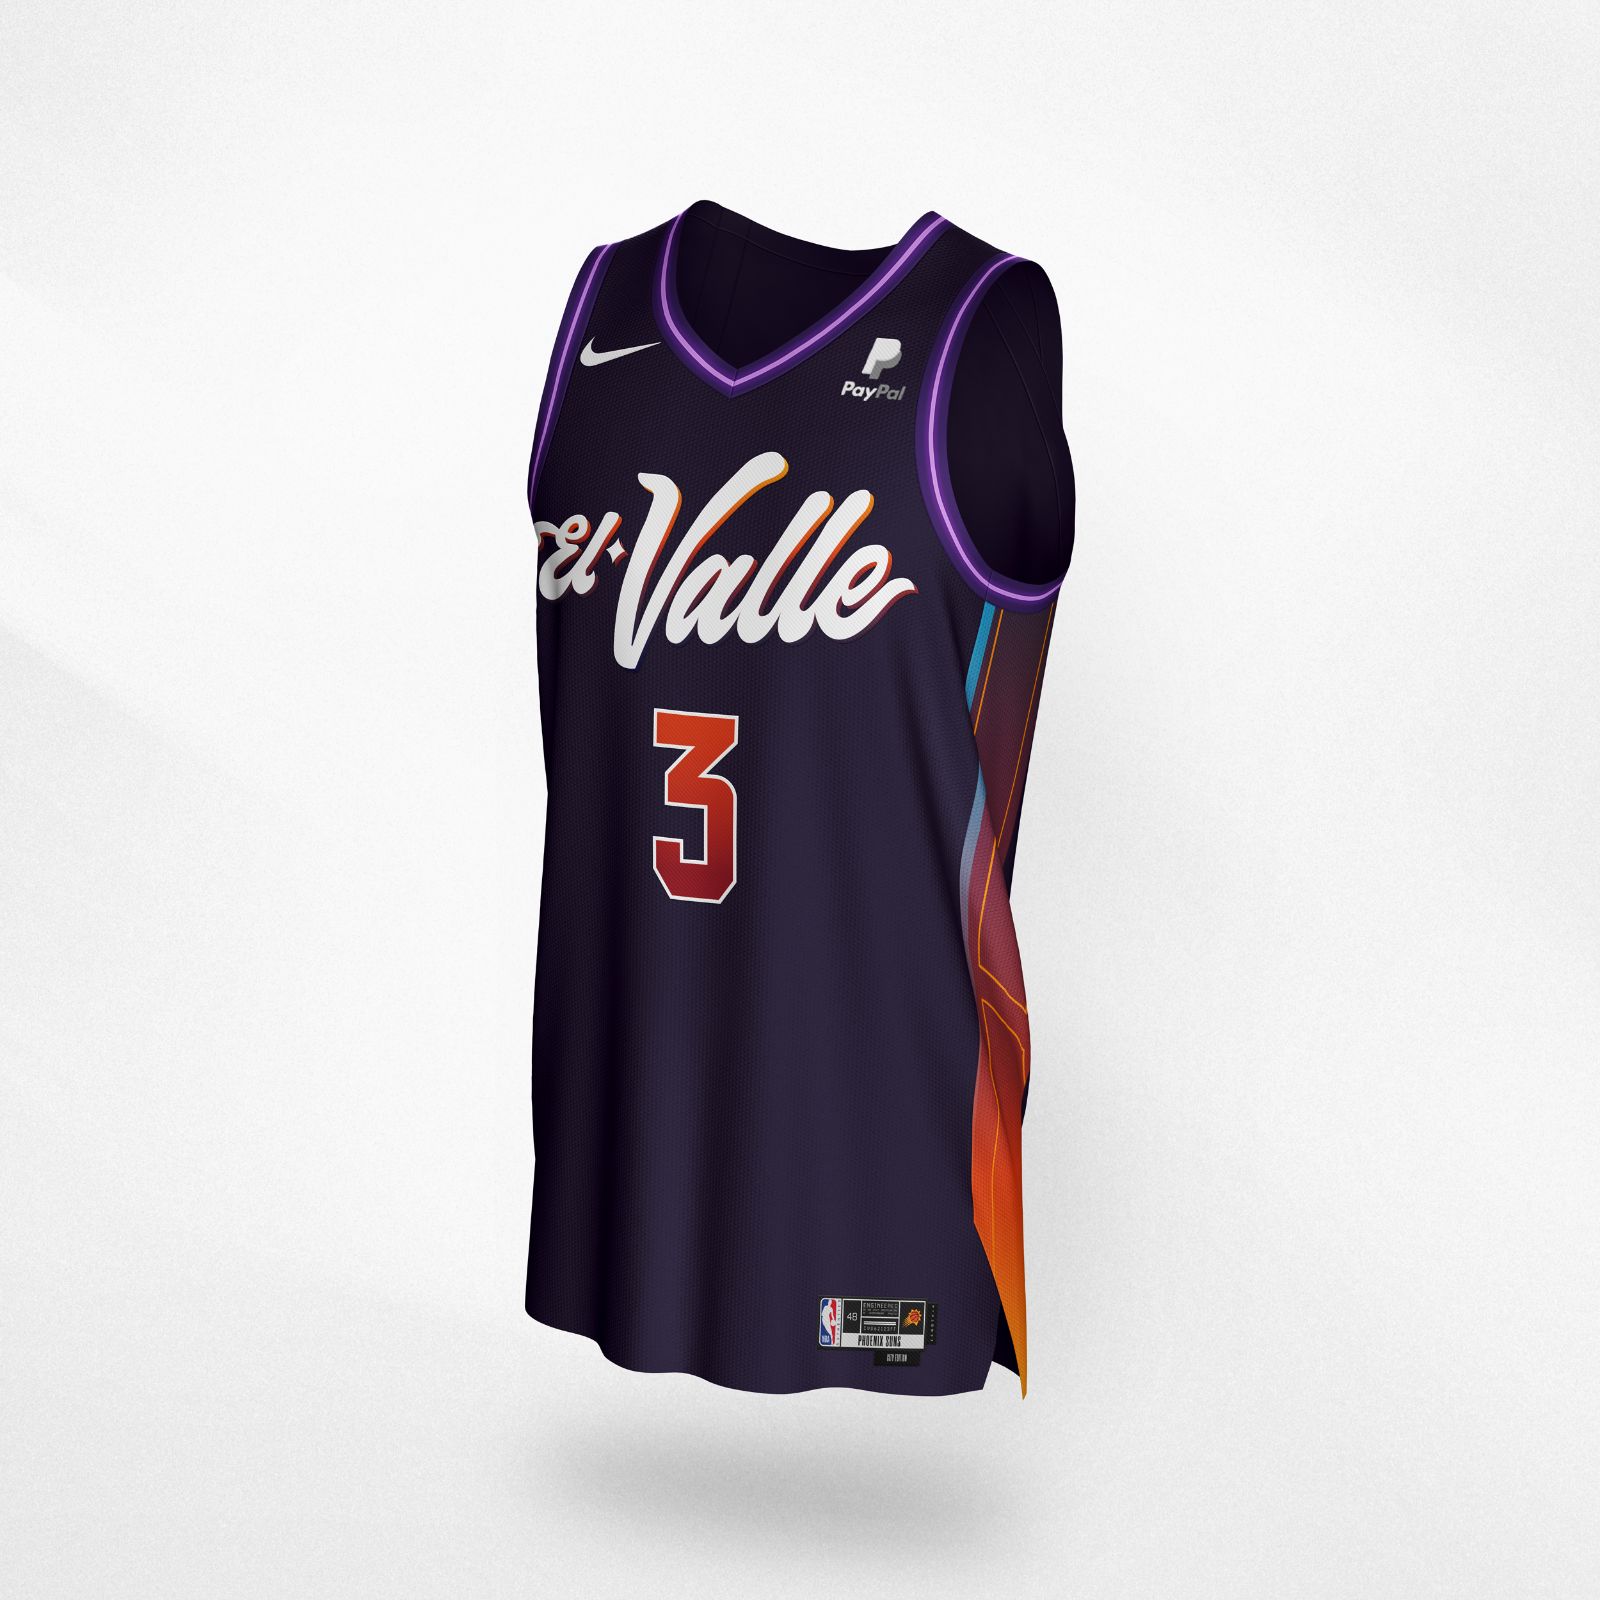 Phoenix Suns City Edition Jerseys El Valle OFFICIALLY LEAKED (My